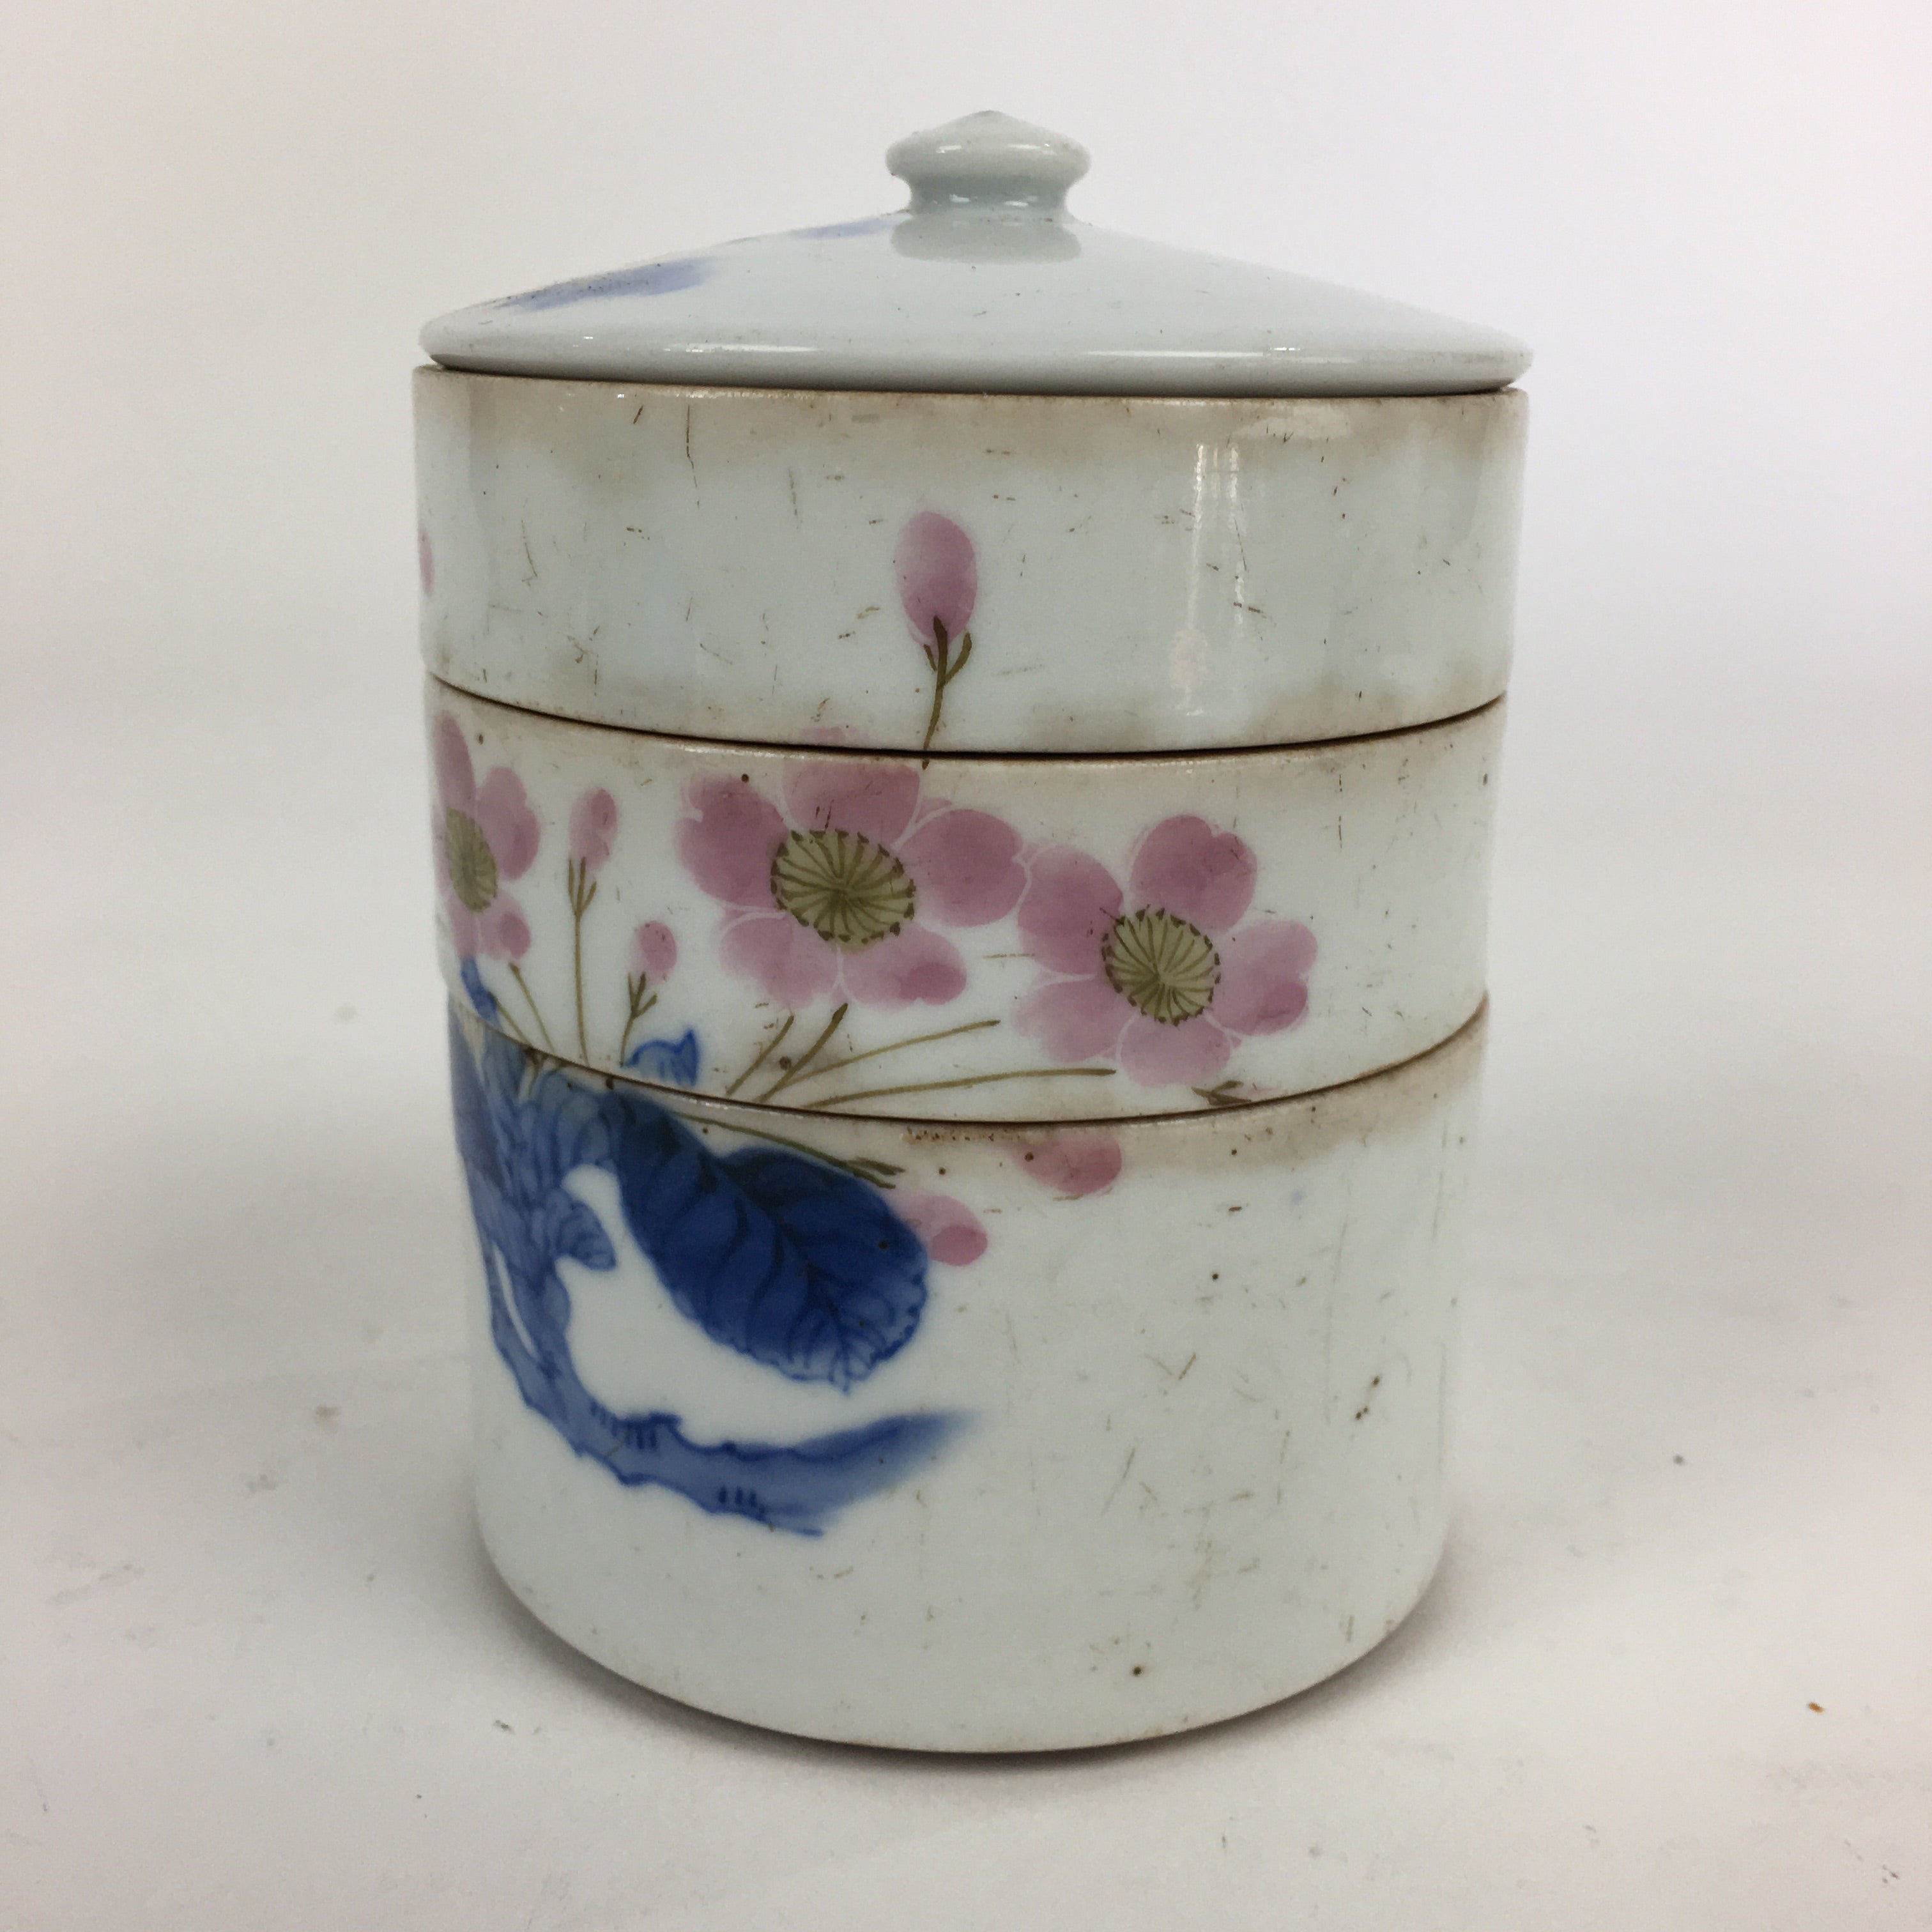 Japanese Ceramic Bento Box Three Tiers Stackable Blue And White 5 1/2x5